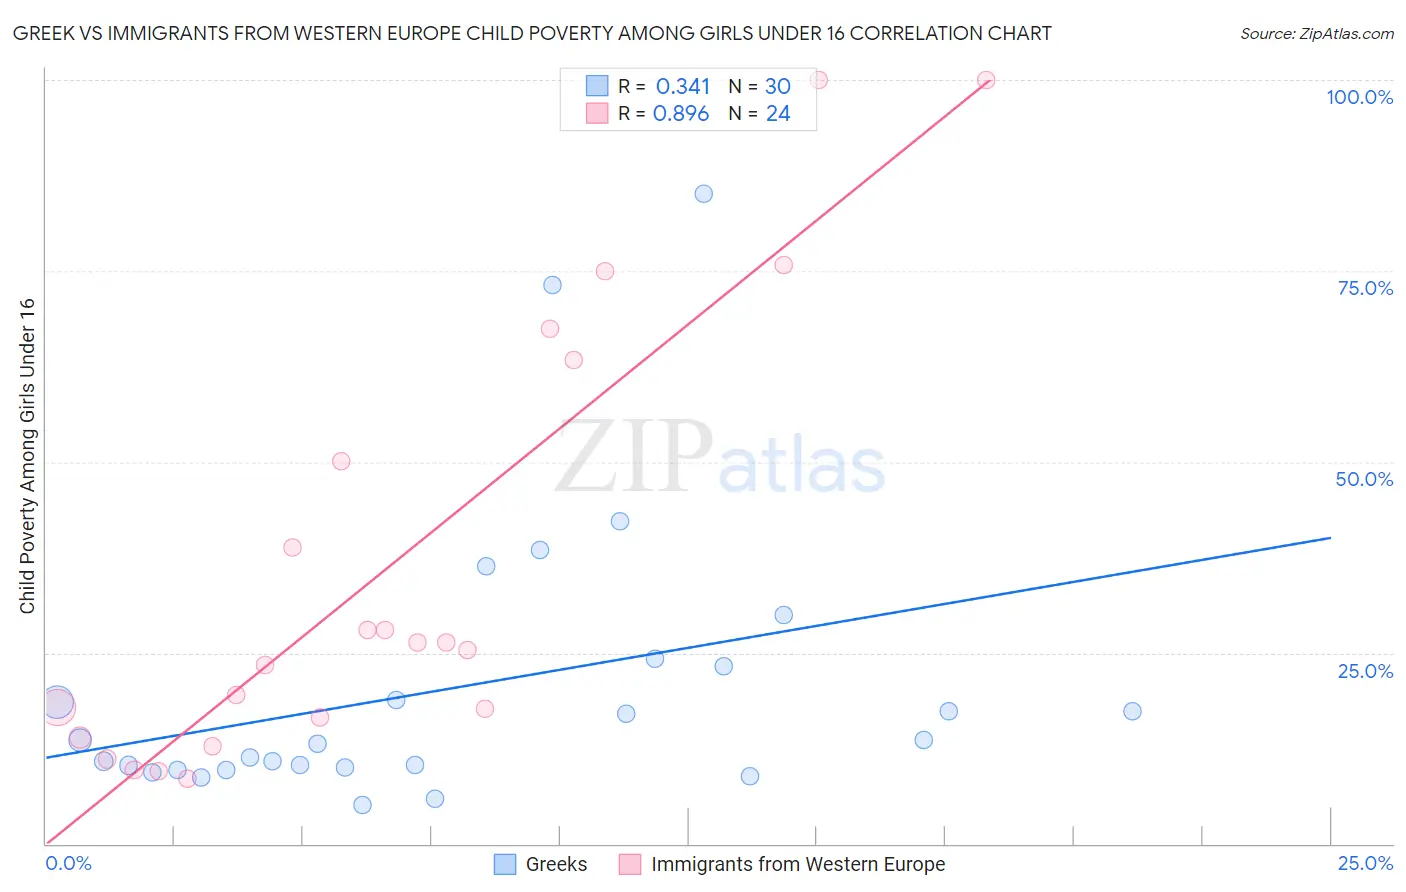 Greek vs Immigrants from Western Europe Child Poverty Among Girls Under 16